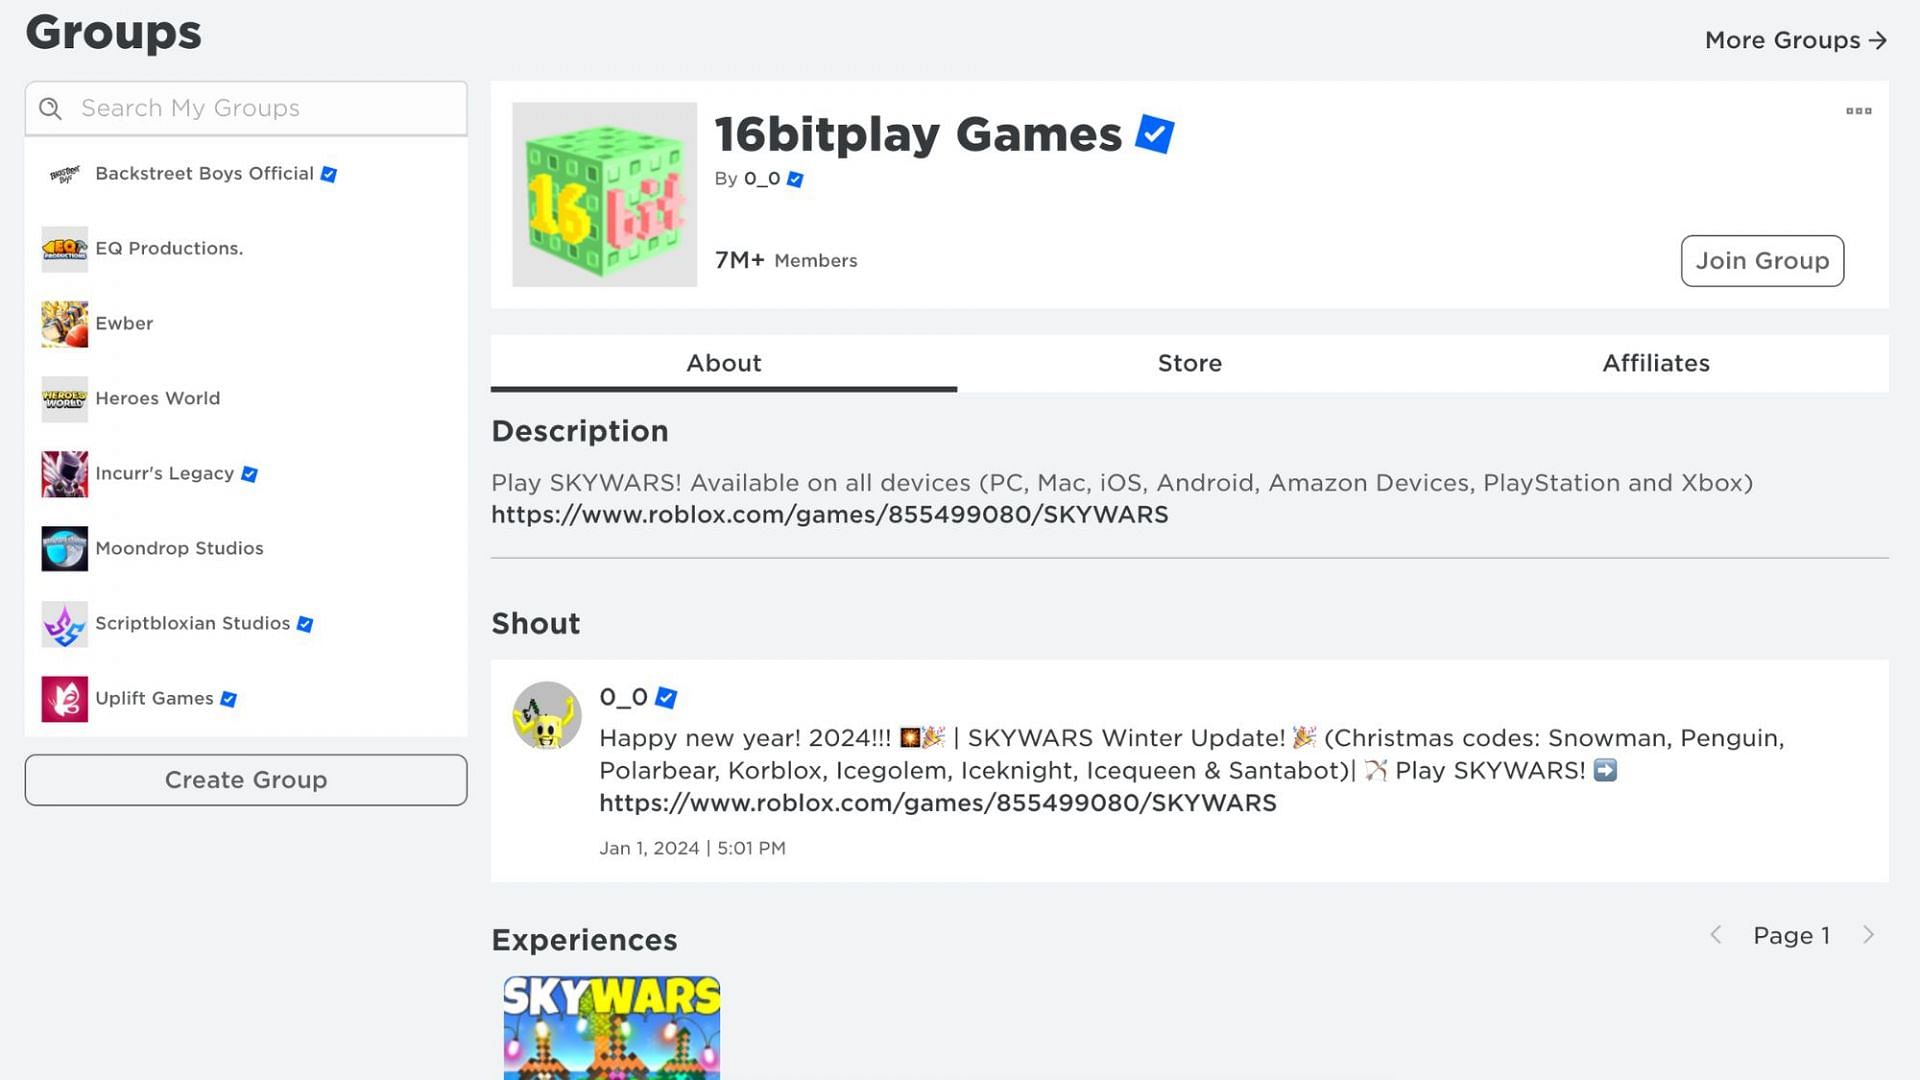 Join the group to get the codes first (Image via Roblox|Sportskeeda)